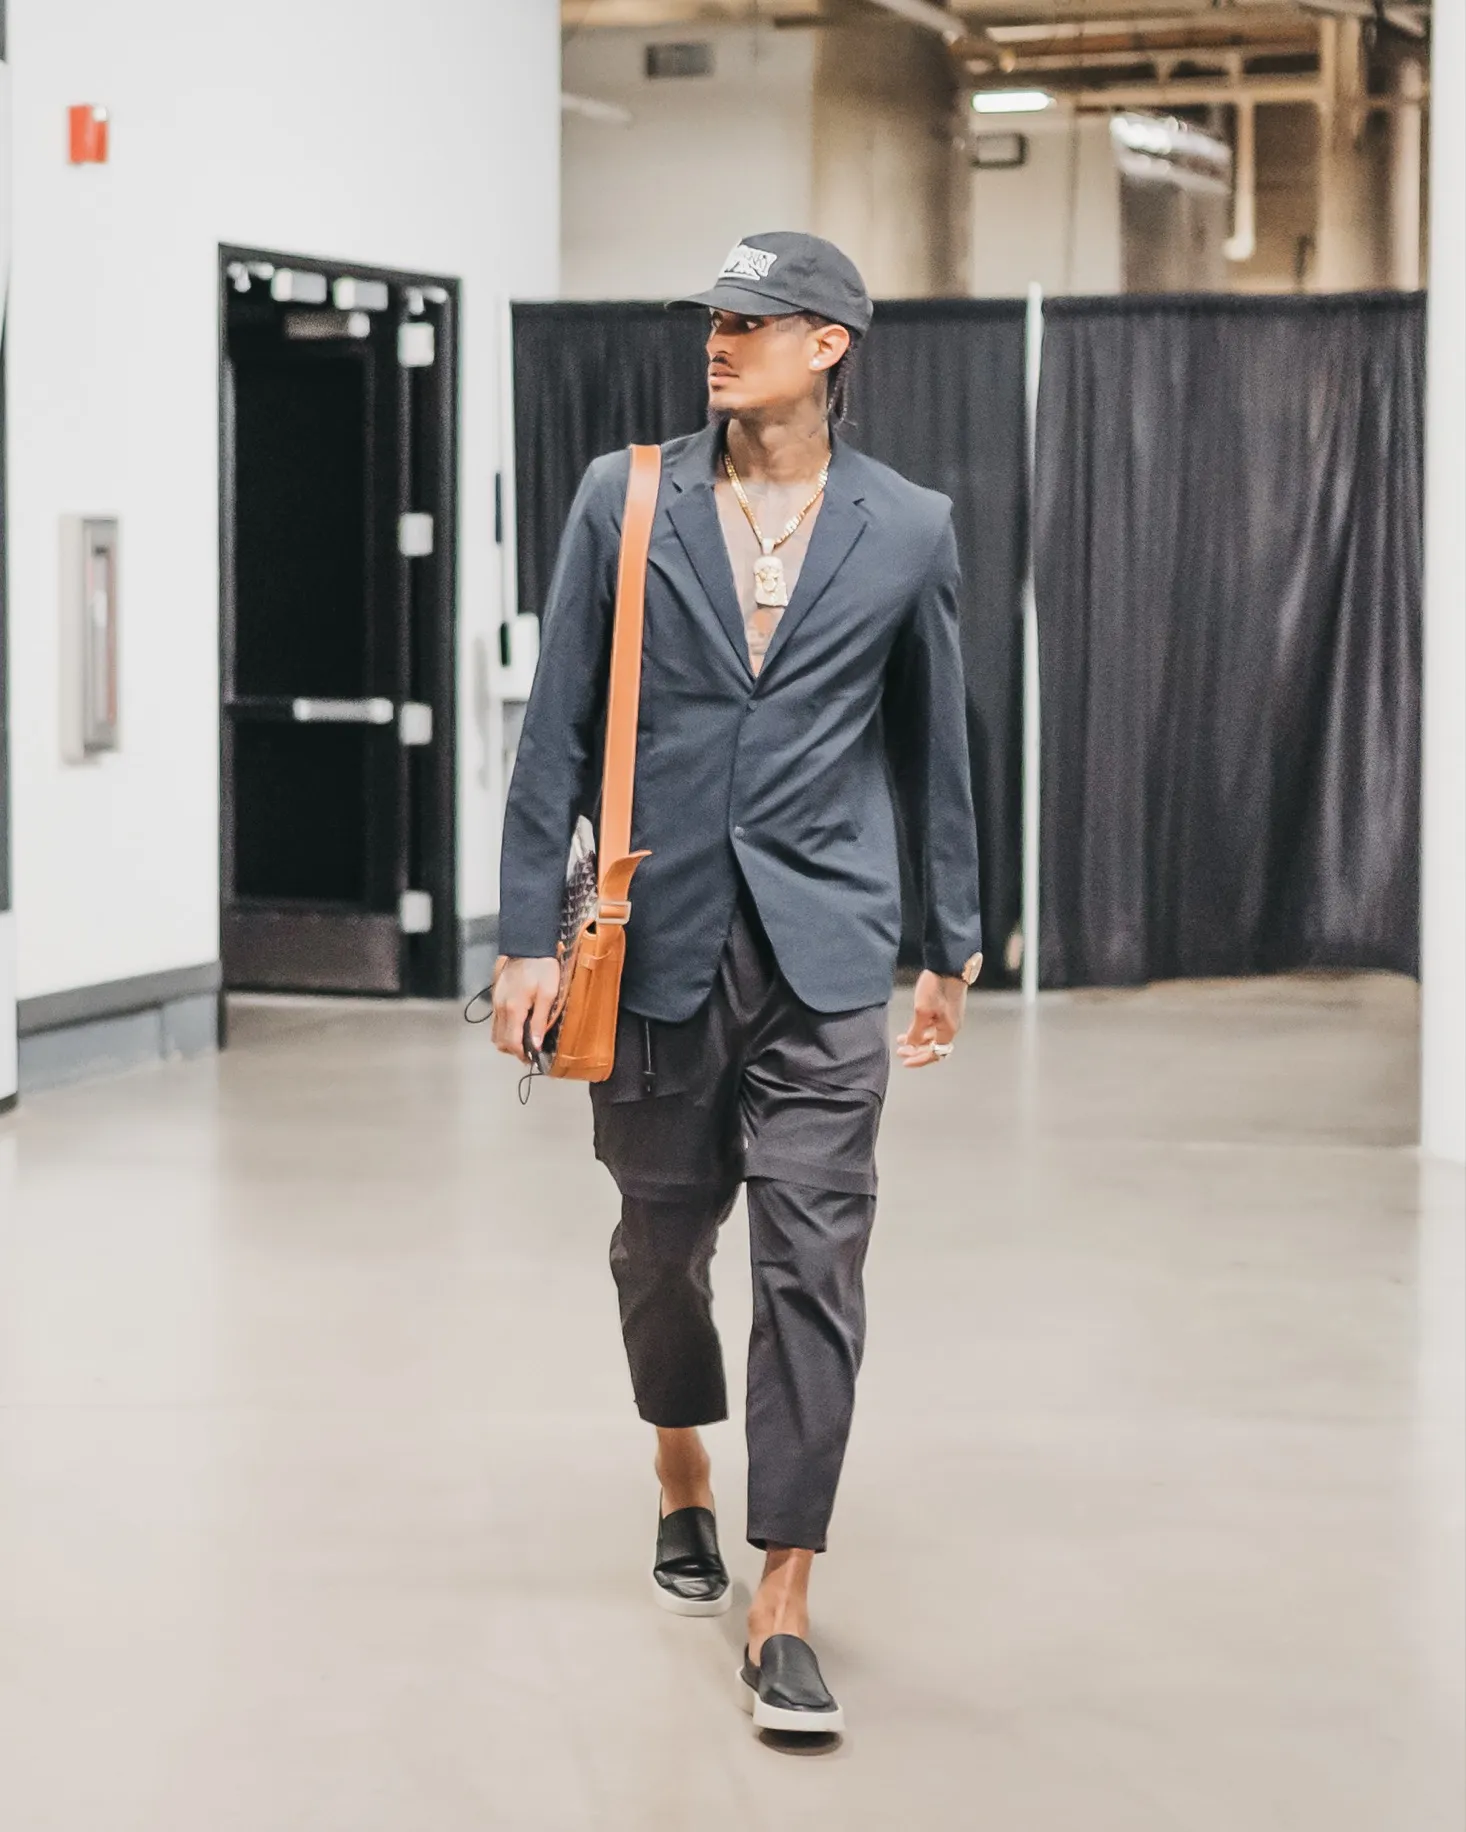 ProTrending on Instagram: “The #LouisVuitton workwear denim jacket has been  making its rounds this season in the NBA Tunnel. Which Pro rocked it the  best?!…”